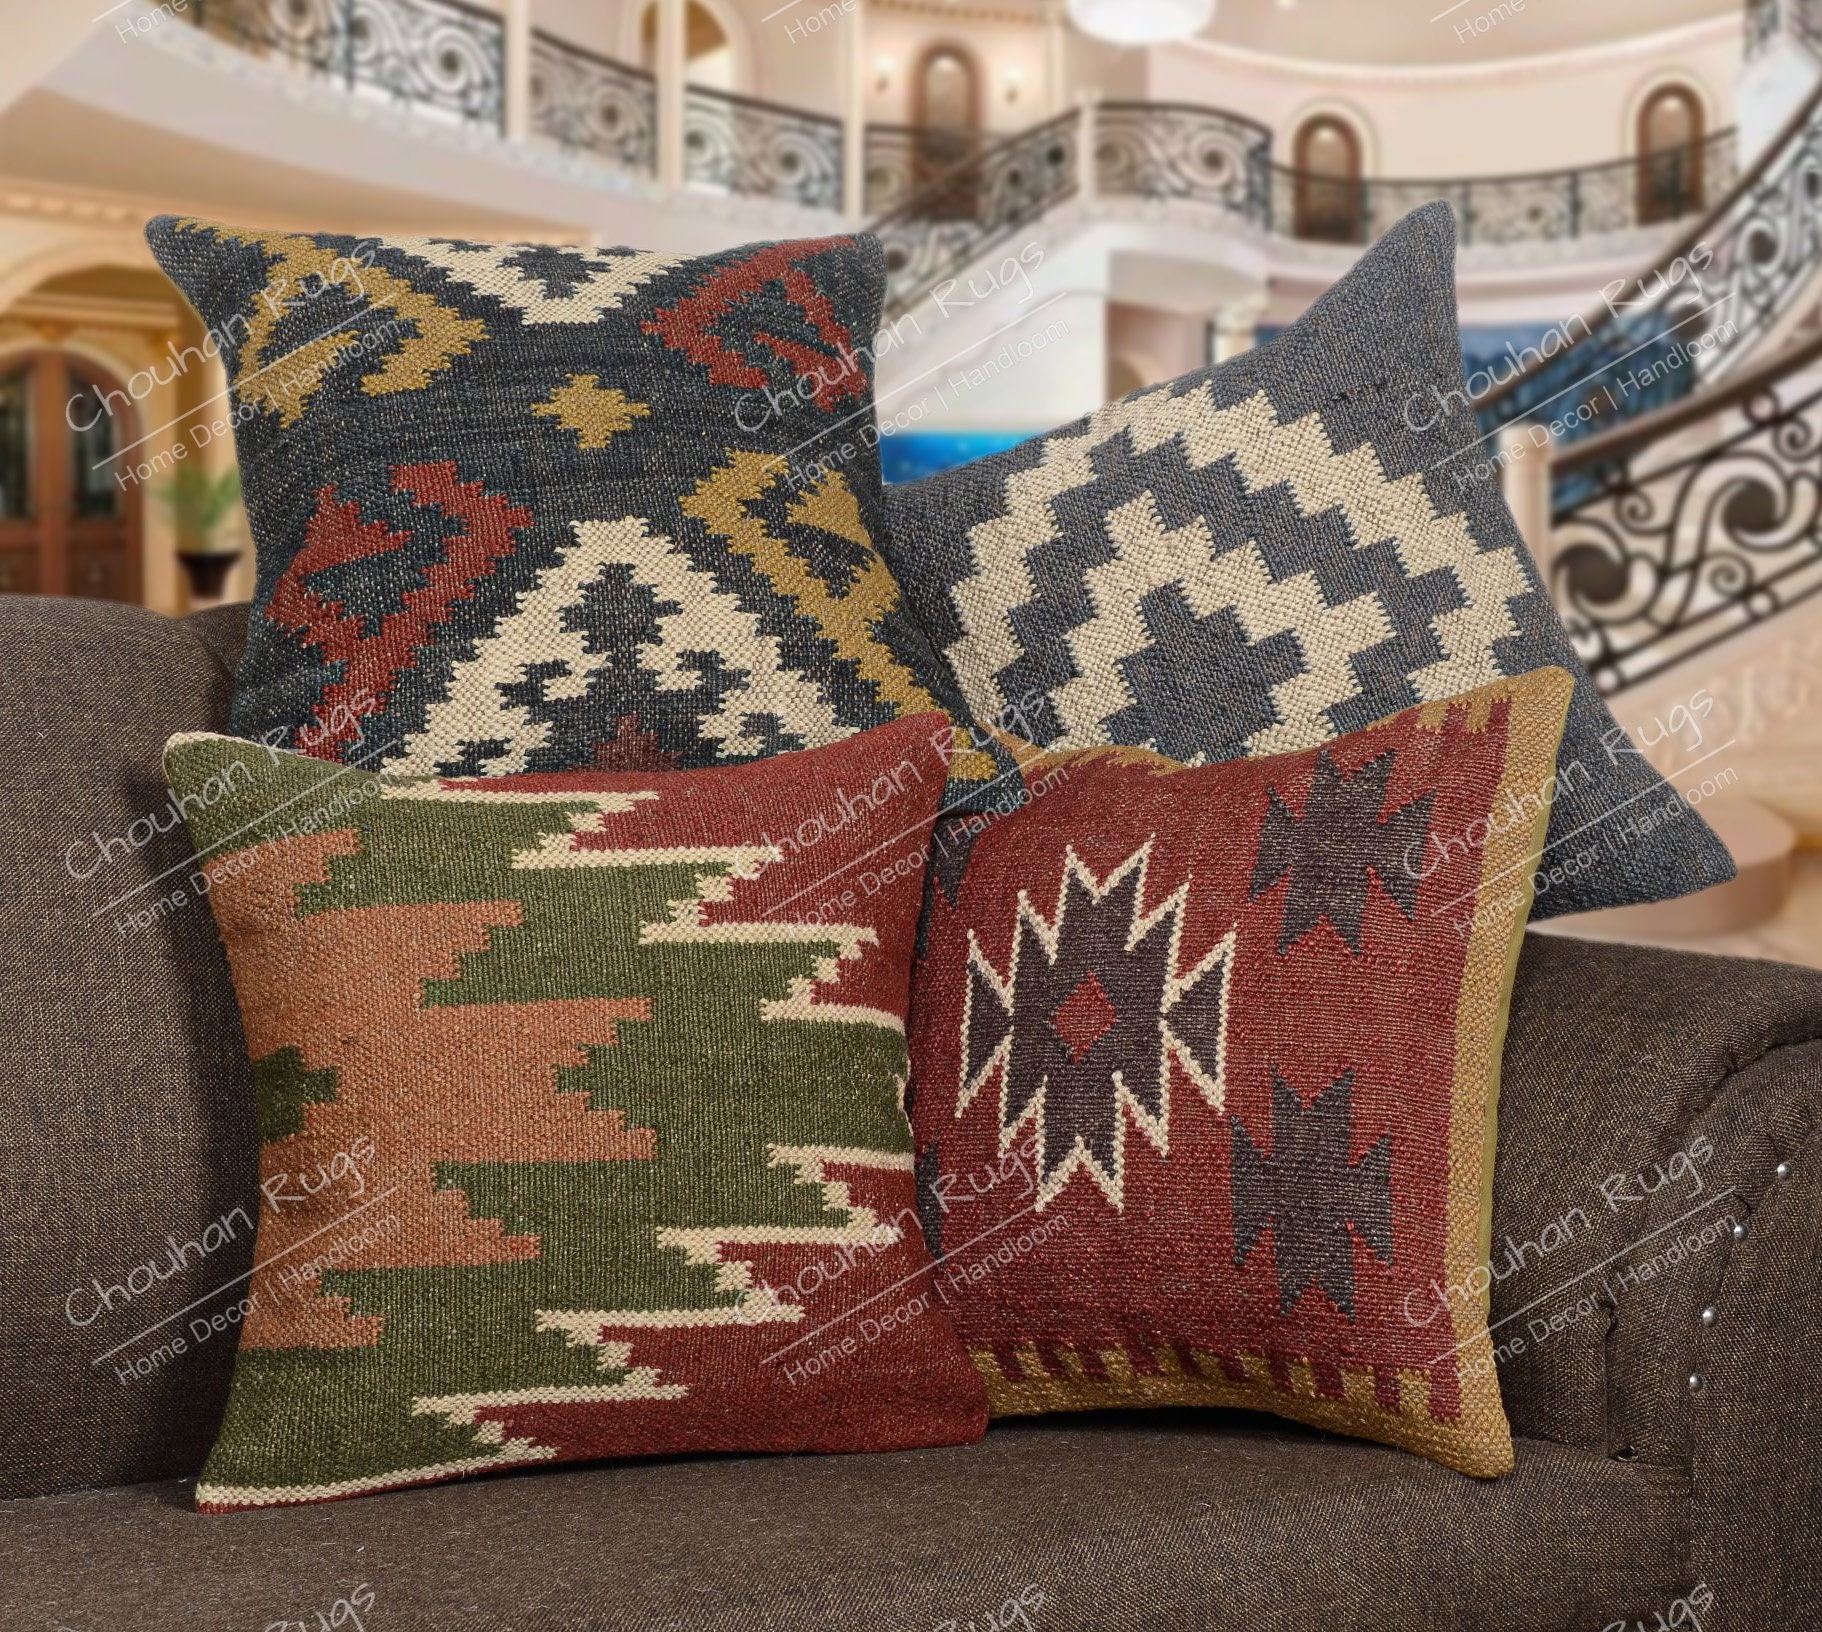 Cushion Covers 18 Inch Set of 2 Decor Throw Pillows Cover Pillow Cases Wool  Jute